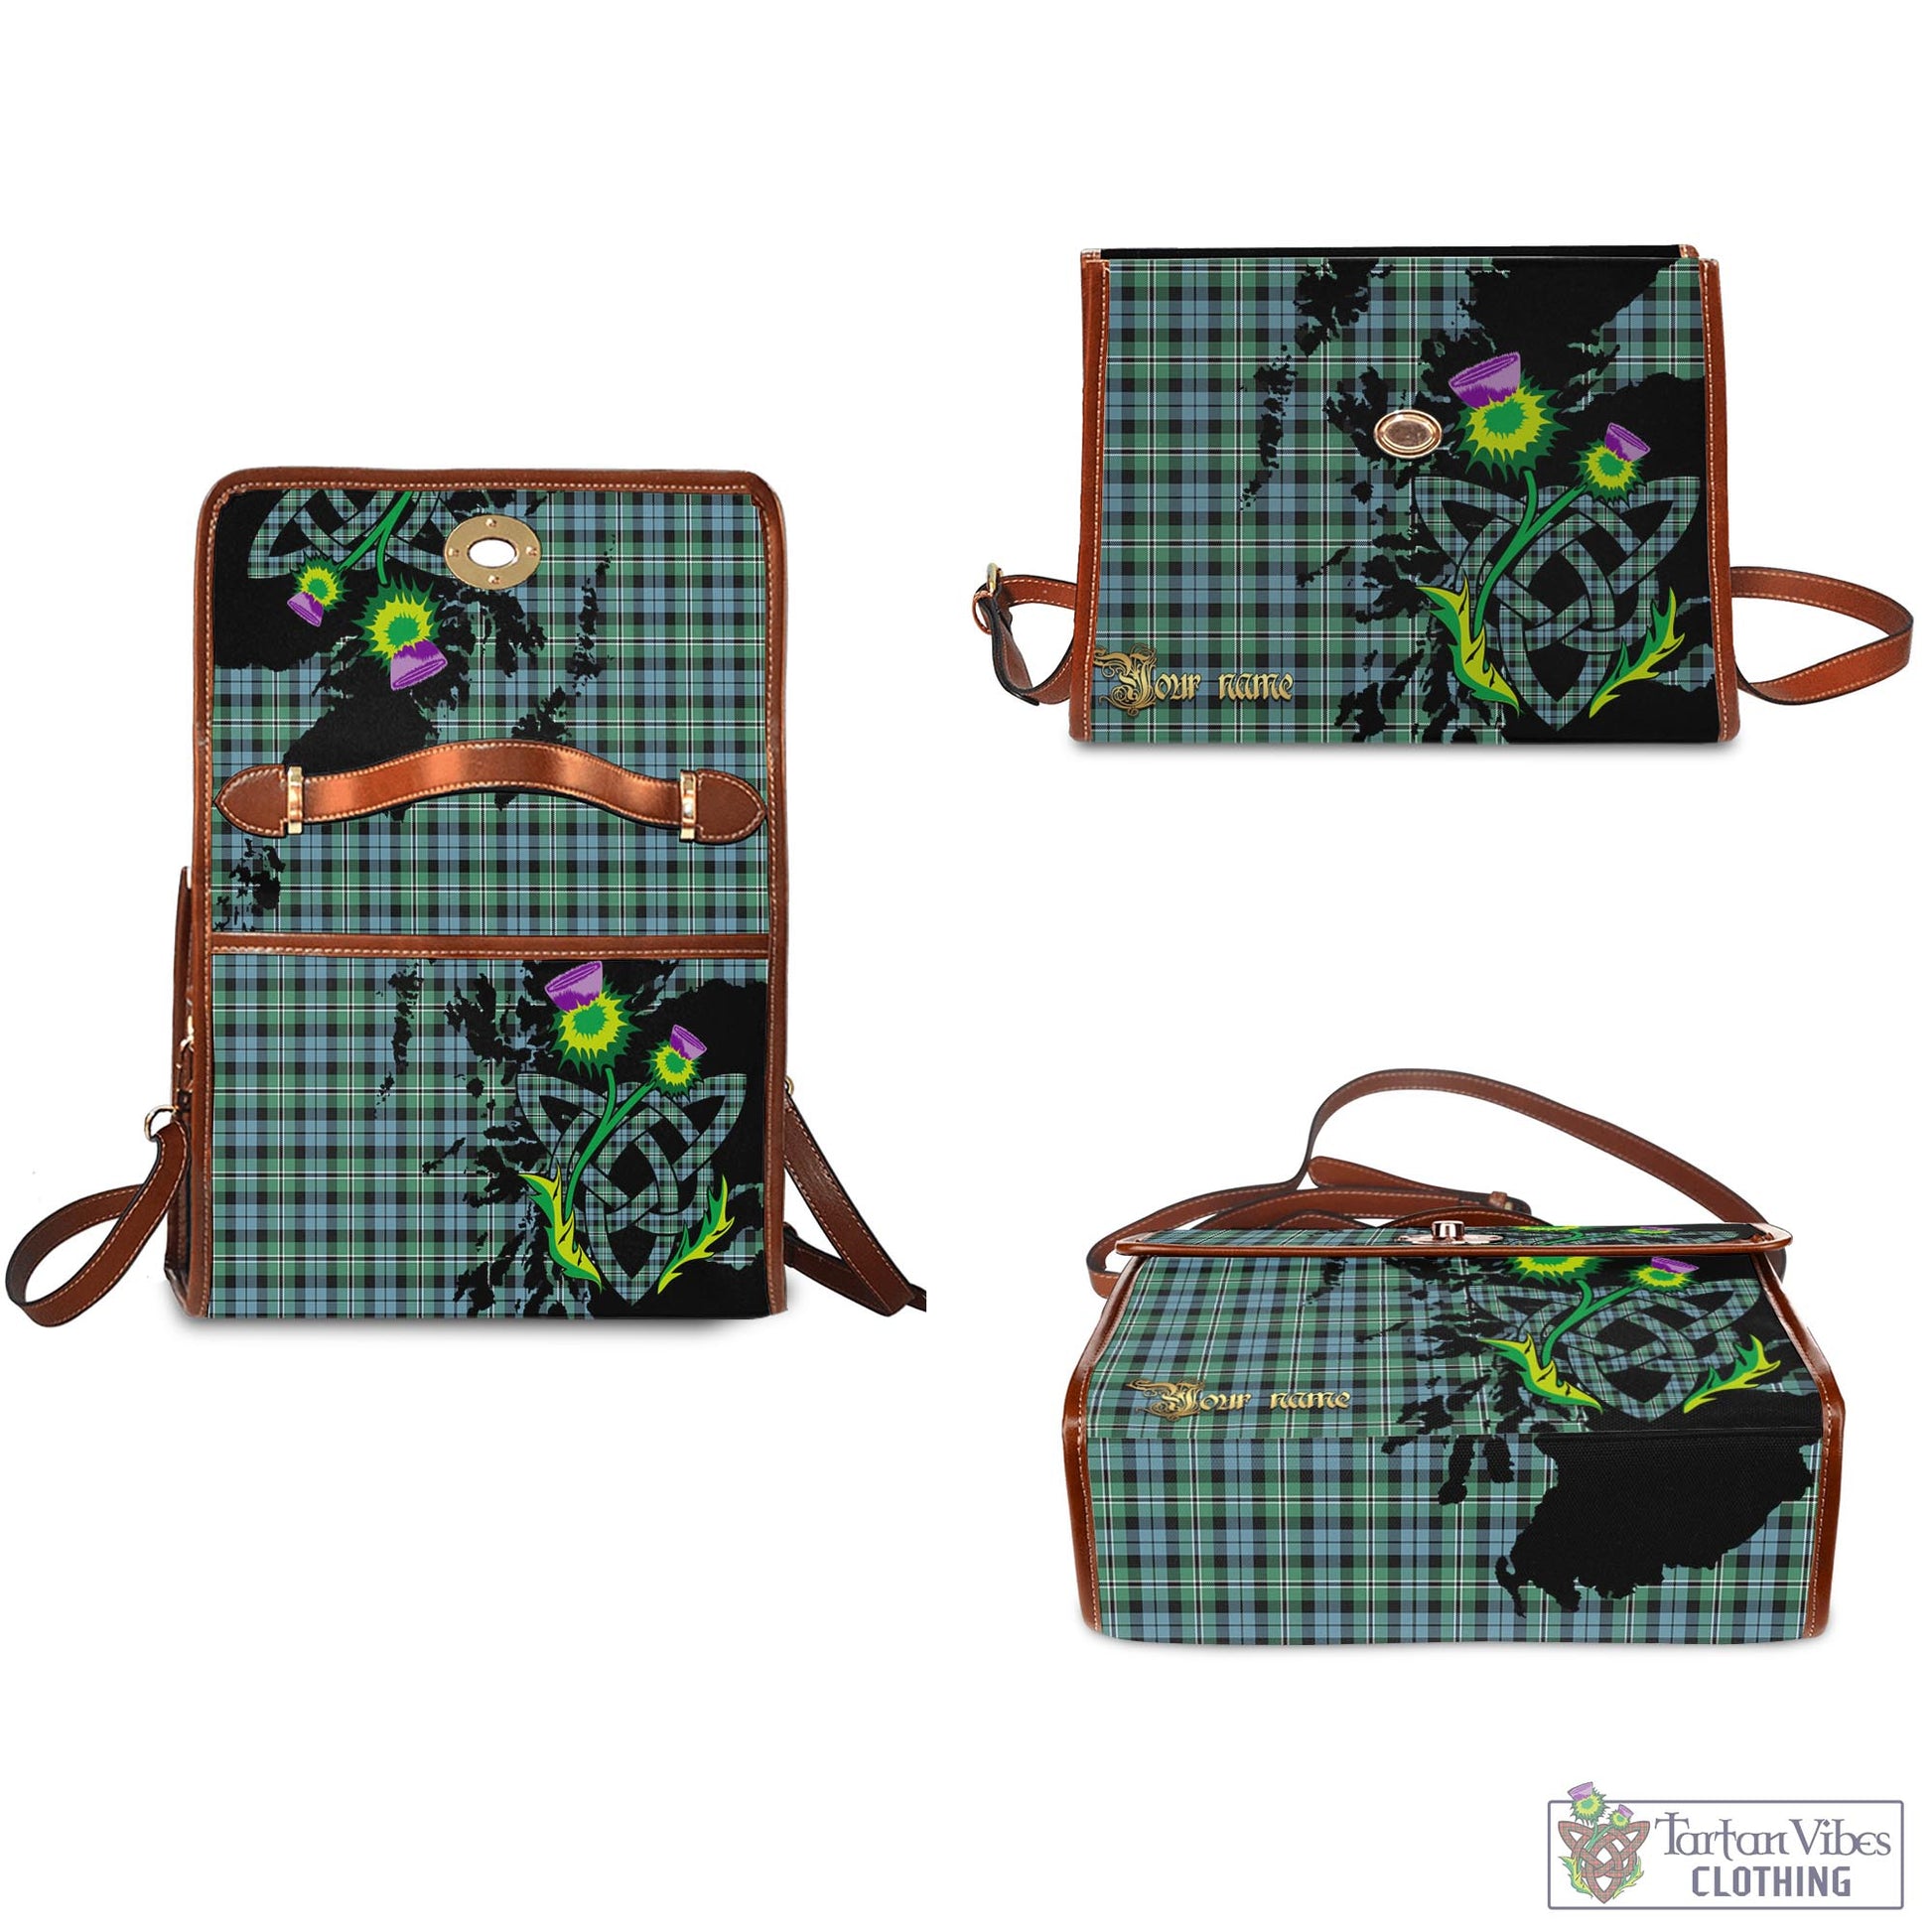 Tartan Vibes Clothing Melville Ancient Tartan Waterproof Canvas Bag with Scotland Map and Thistle Celtic Accents